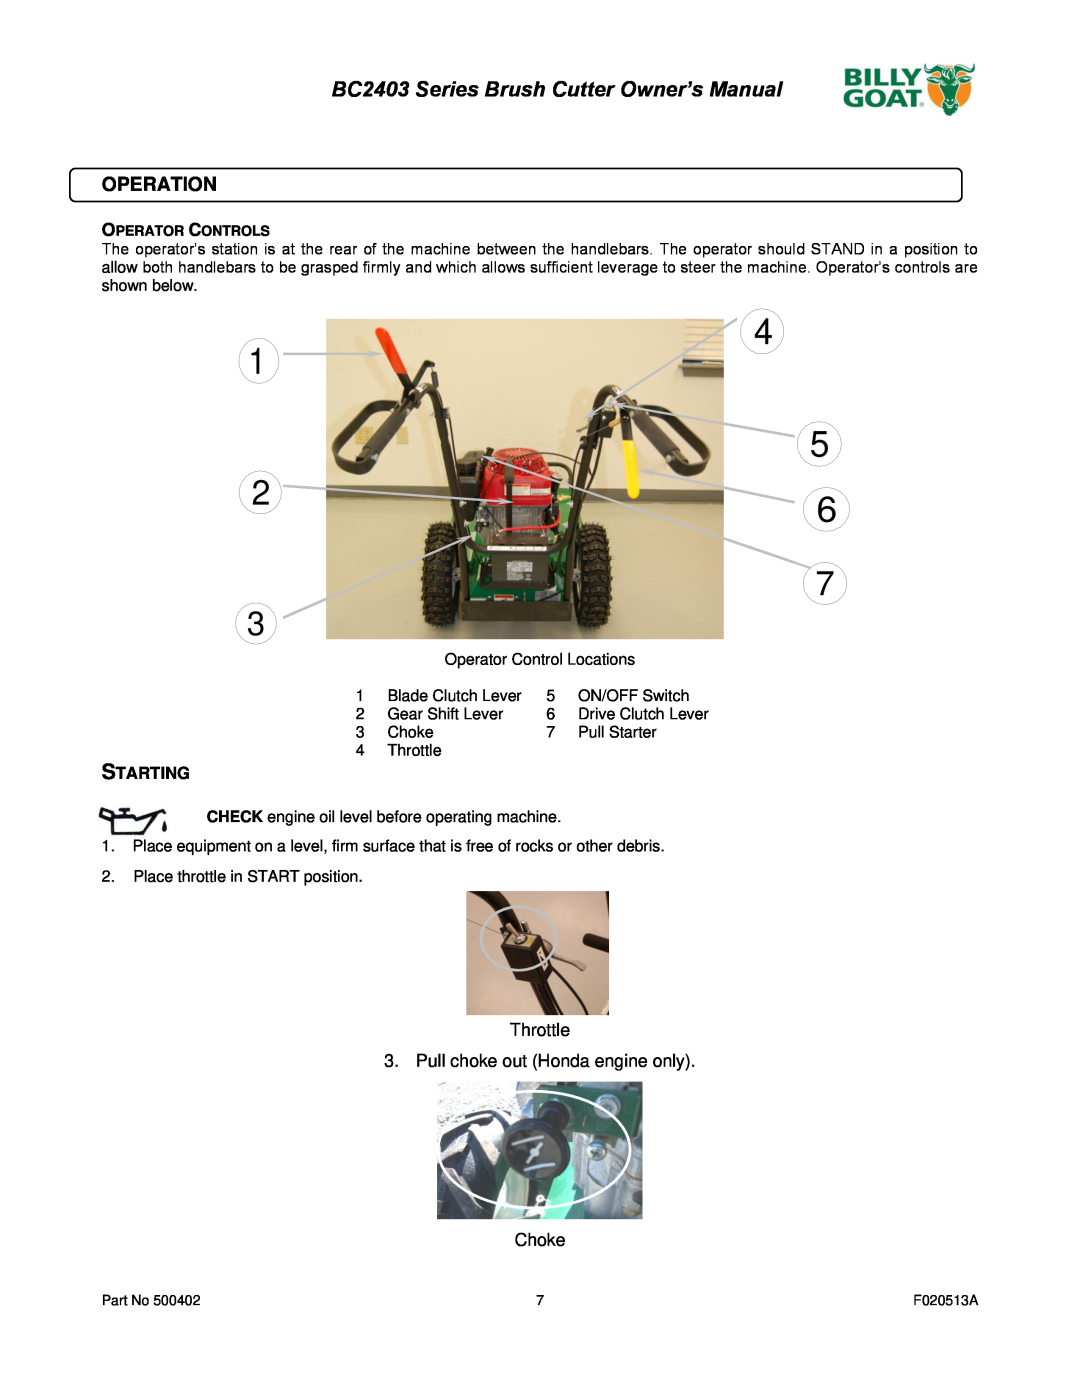 Billy Goat owner manual Operation, BC2403 Series Brush Cutter Owner’s Manual, Starting 